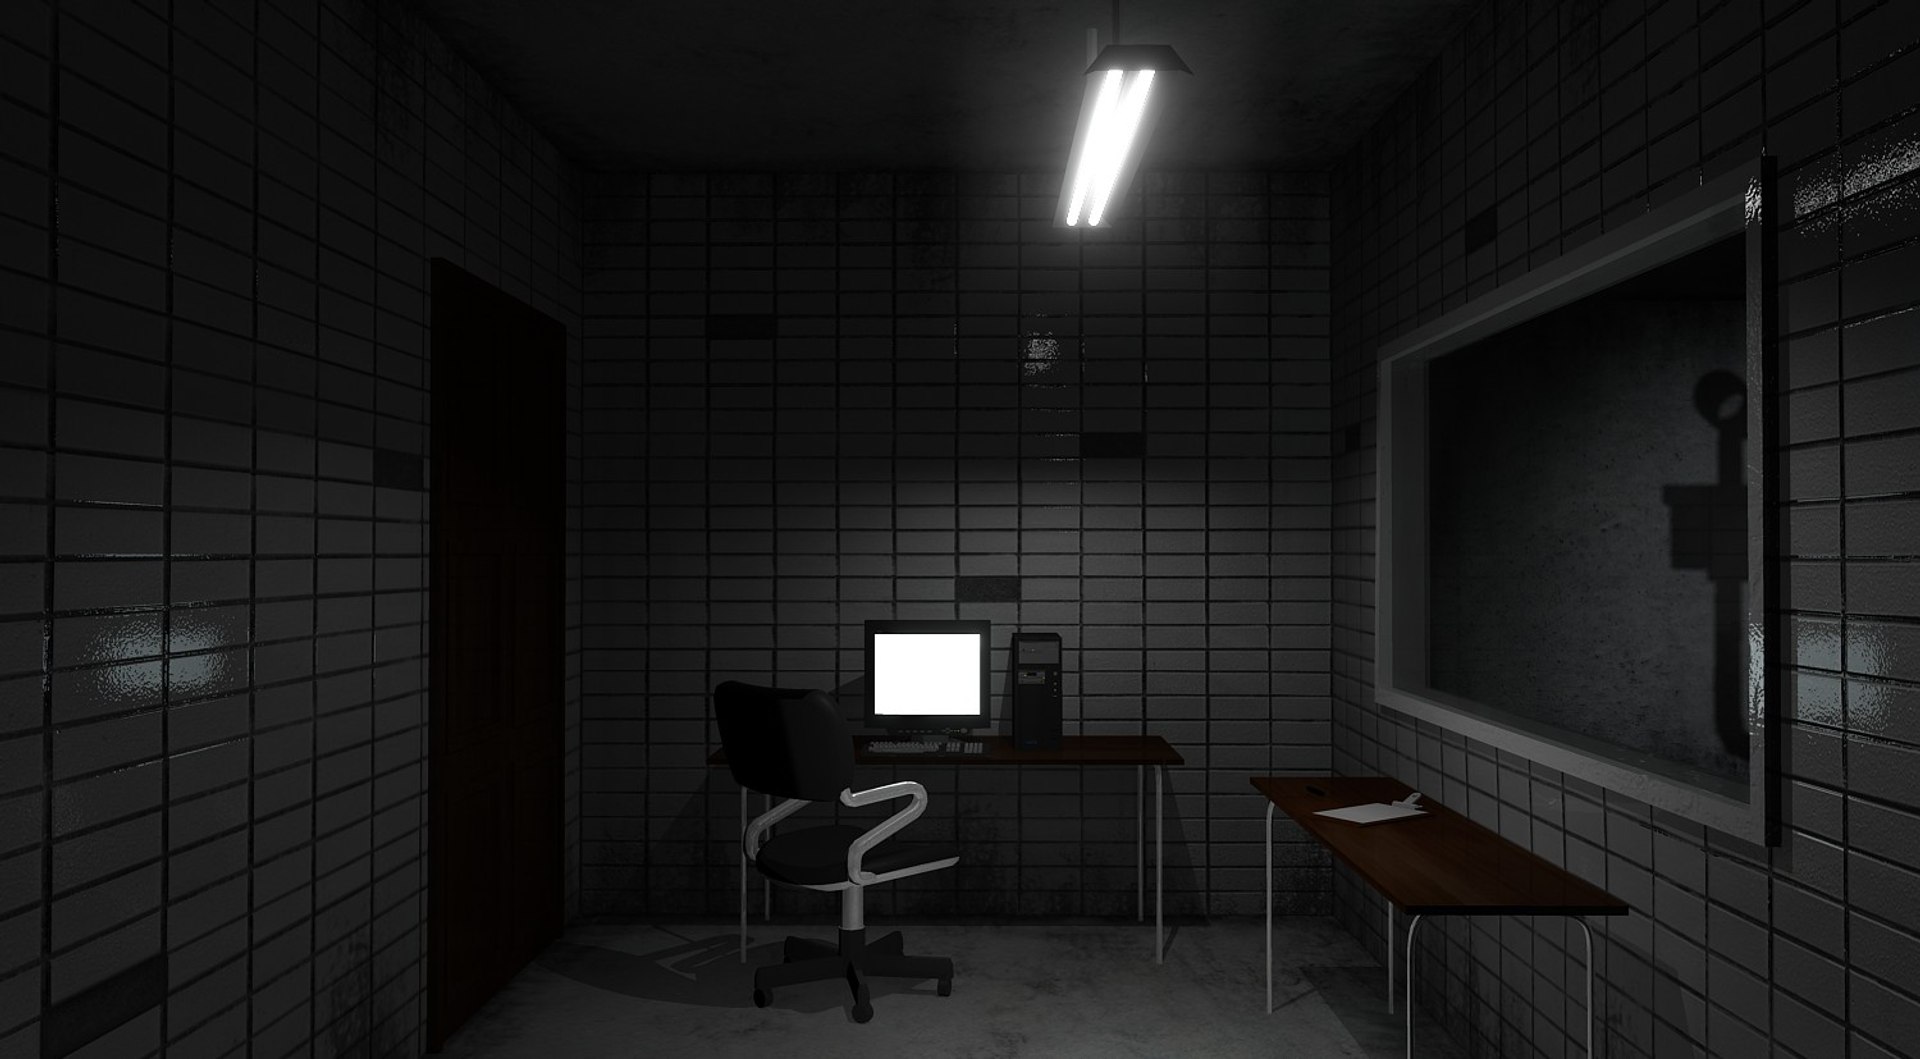 SCP-079 is all set up for the interrogation I was going back